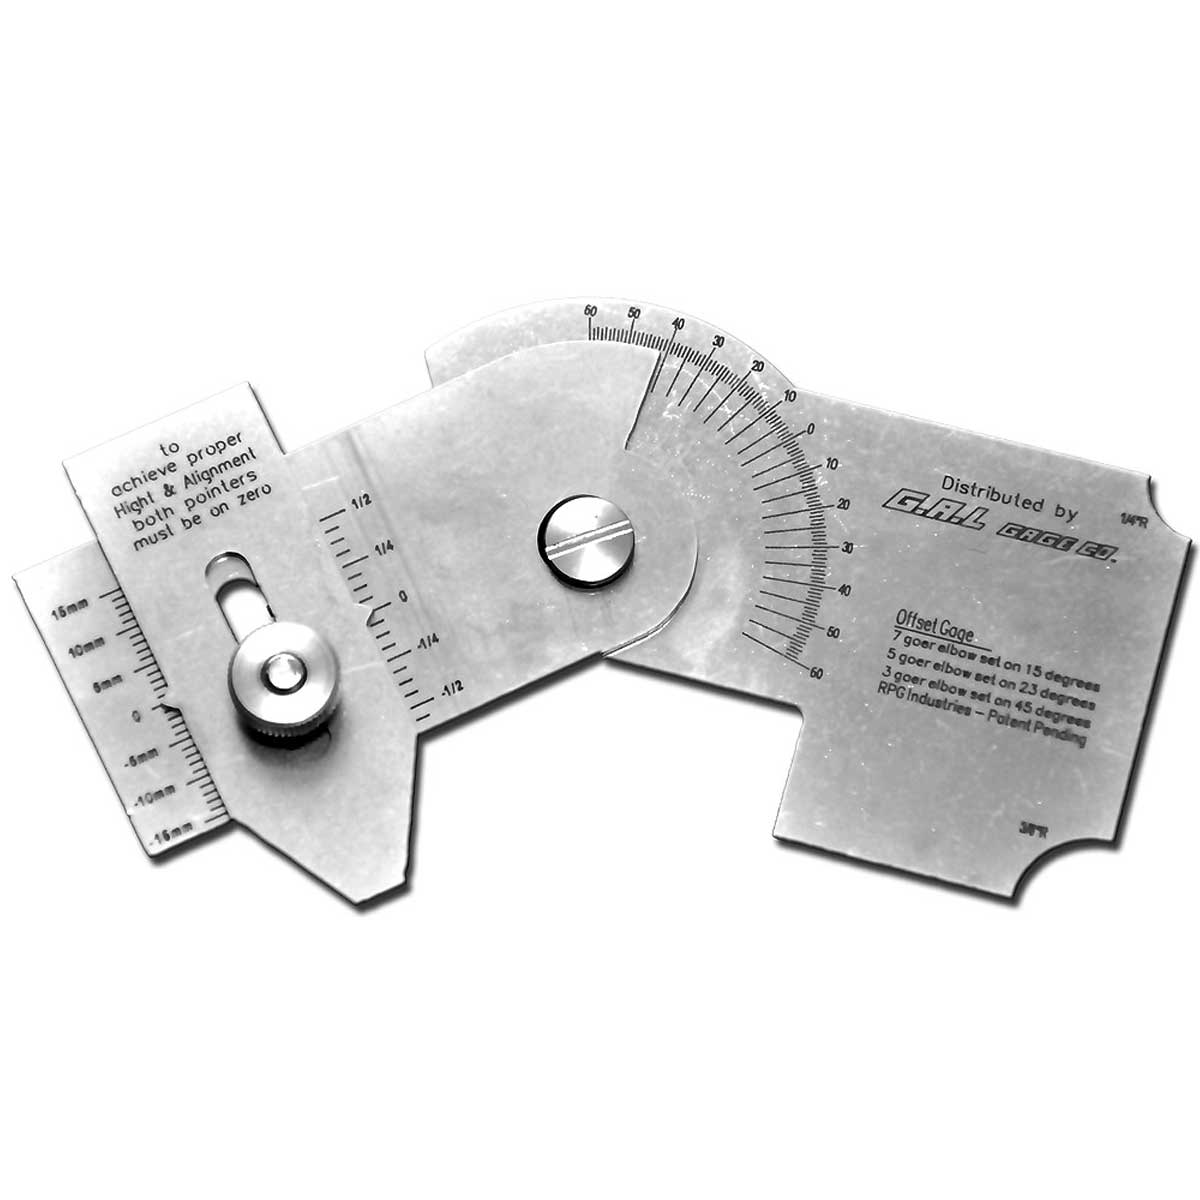 Offset Gauge measures offset between two plates, gored elbows